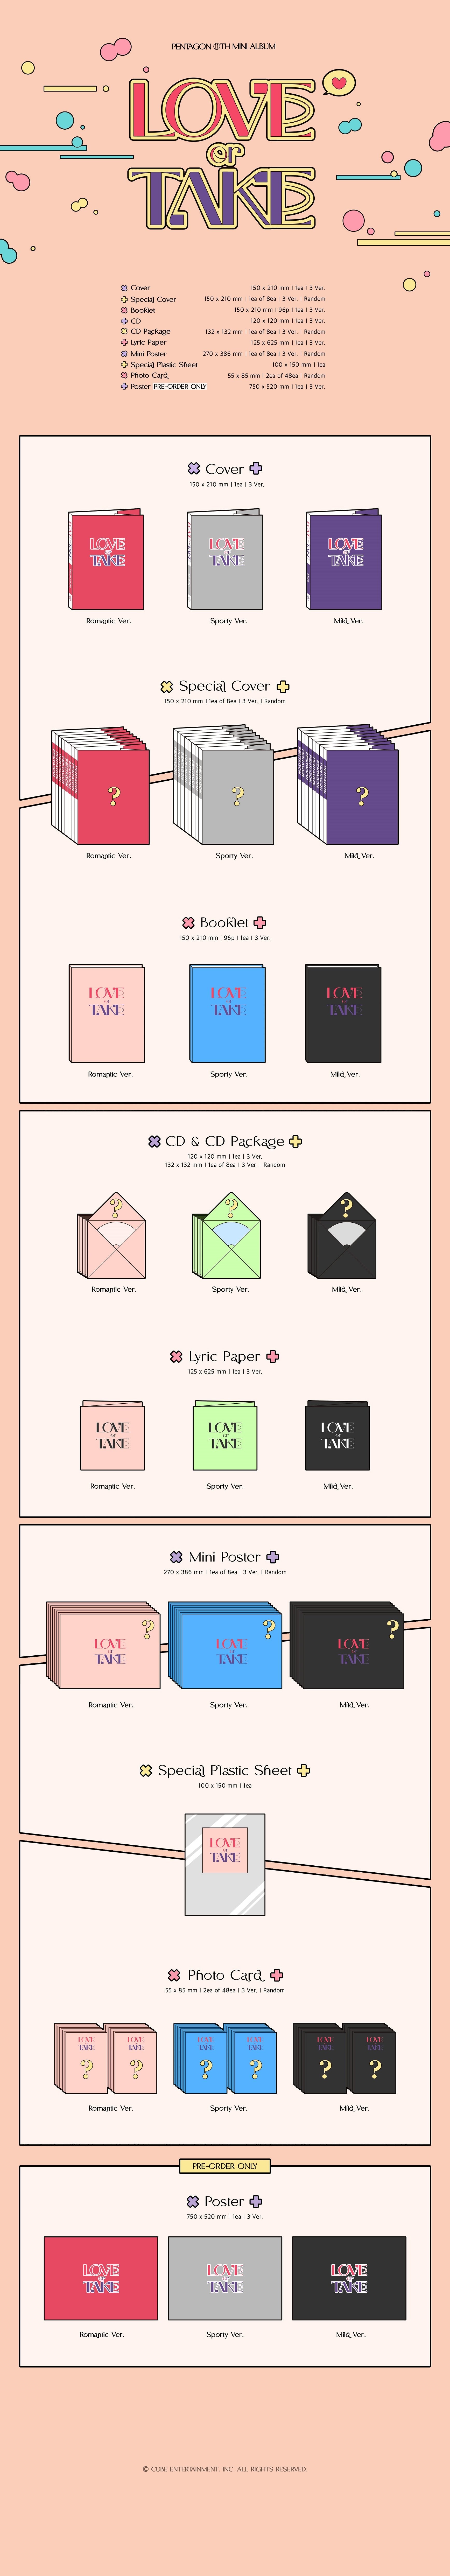 1 CD
1 Mini Poster On Pack
1 Booklet (96 pages)
1 Lyric Paper
1 Plastic Sheet
2 Photo Cards